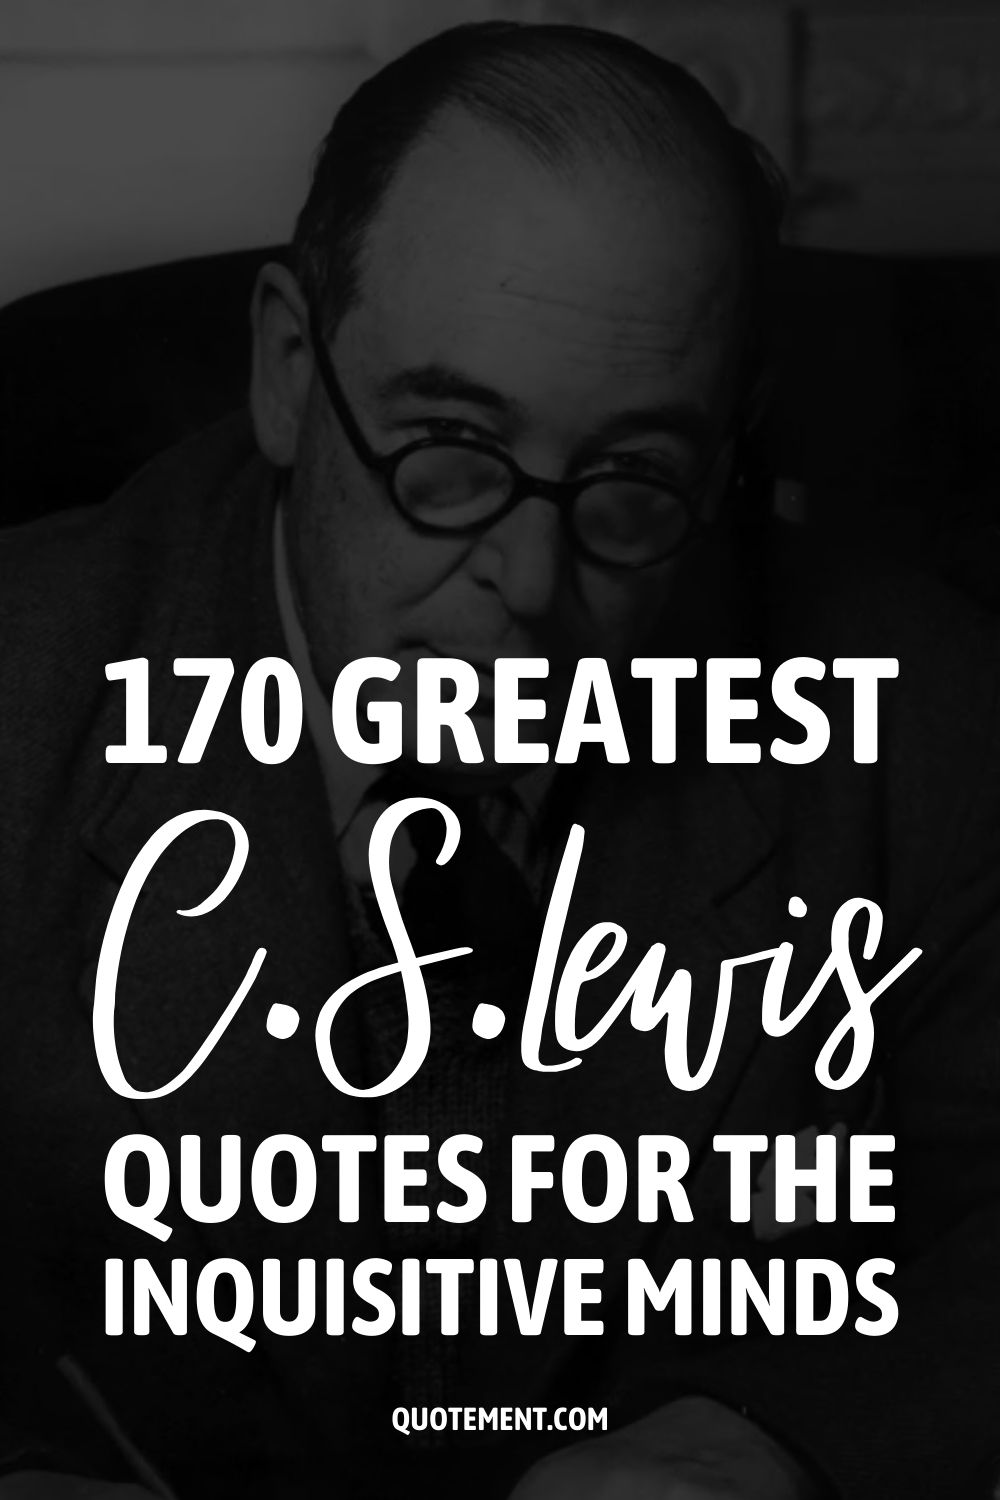 170 Greatest C.S. Lewis Quotes For The Inquisitive Minds 